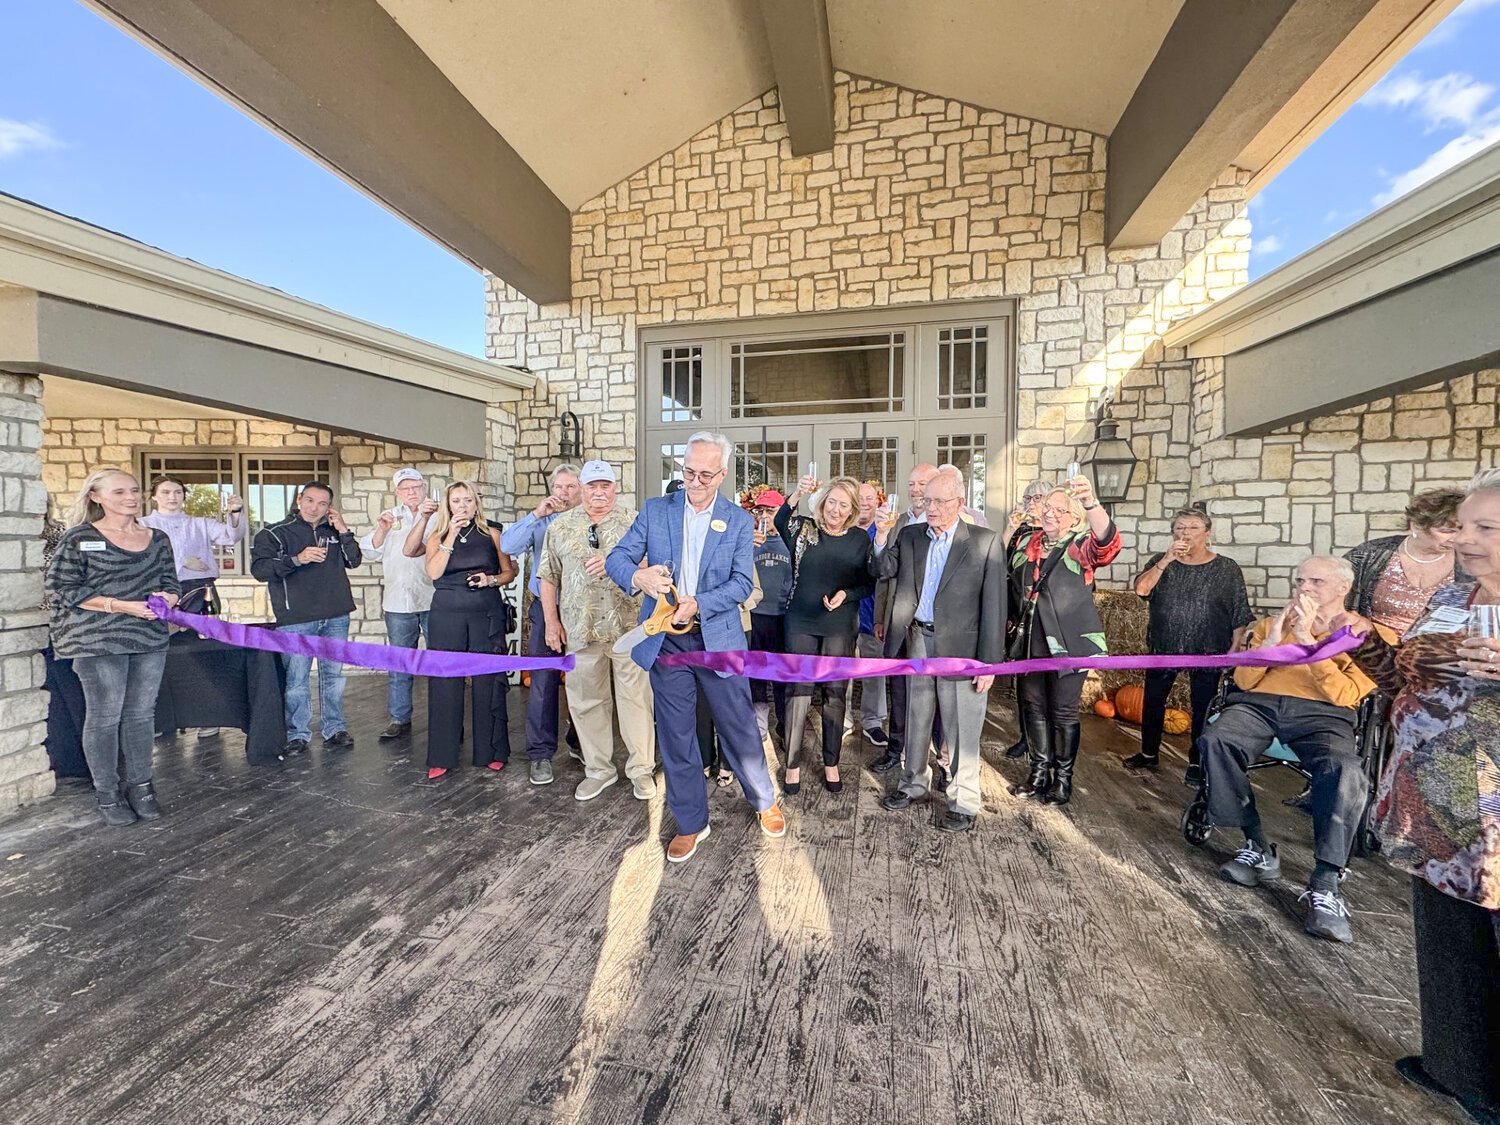 Harbor Lakes Golf Club celebrated its 20th anniversary with a ribbon cutting ceremony on Saturday, Nov. 4.